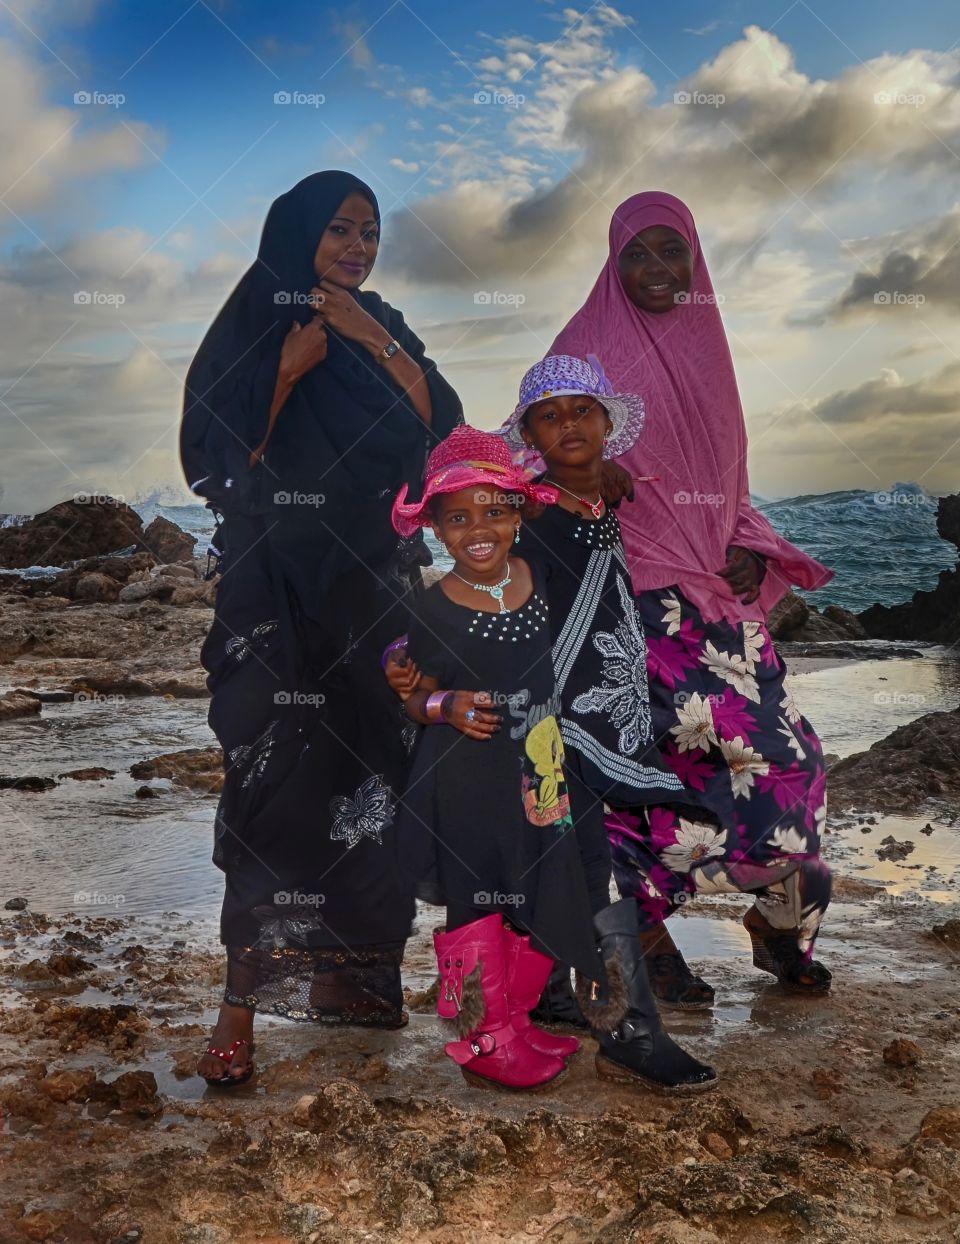 Somali family. The mother and her daugthers enjoyed the sunset on Mogadishu beach when I asked the youngest one for a picture.